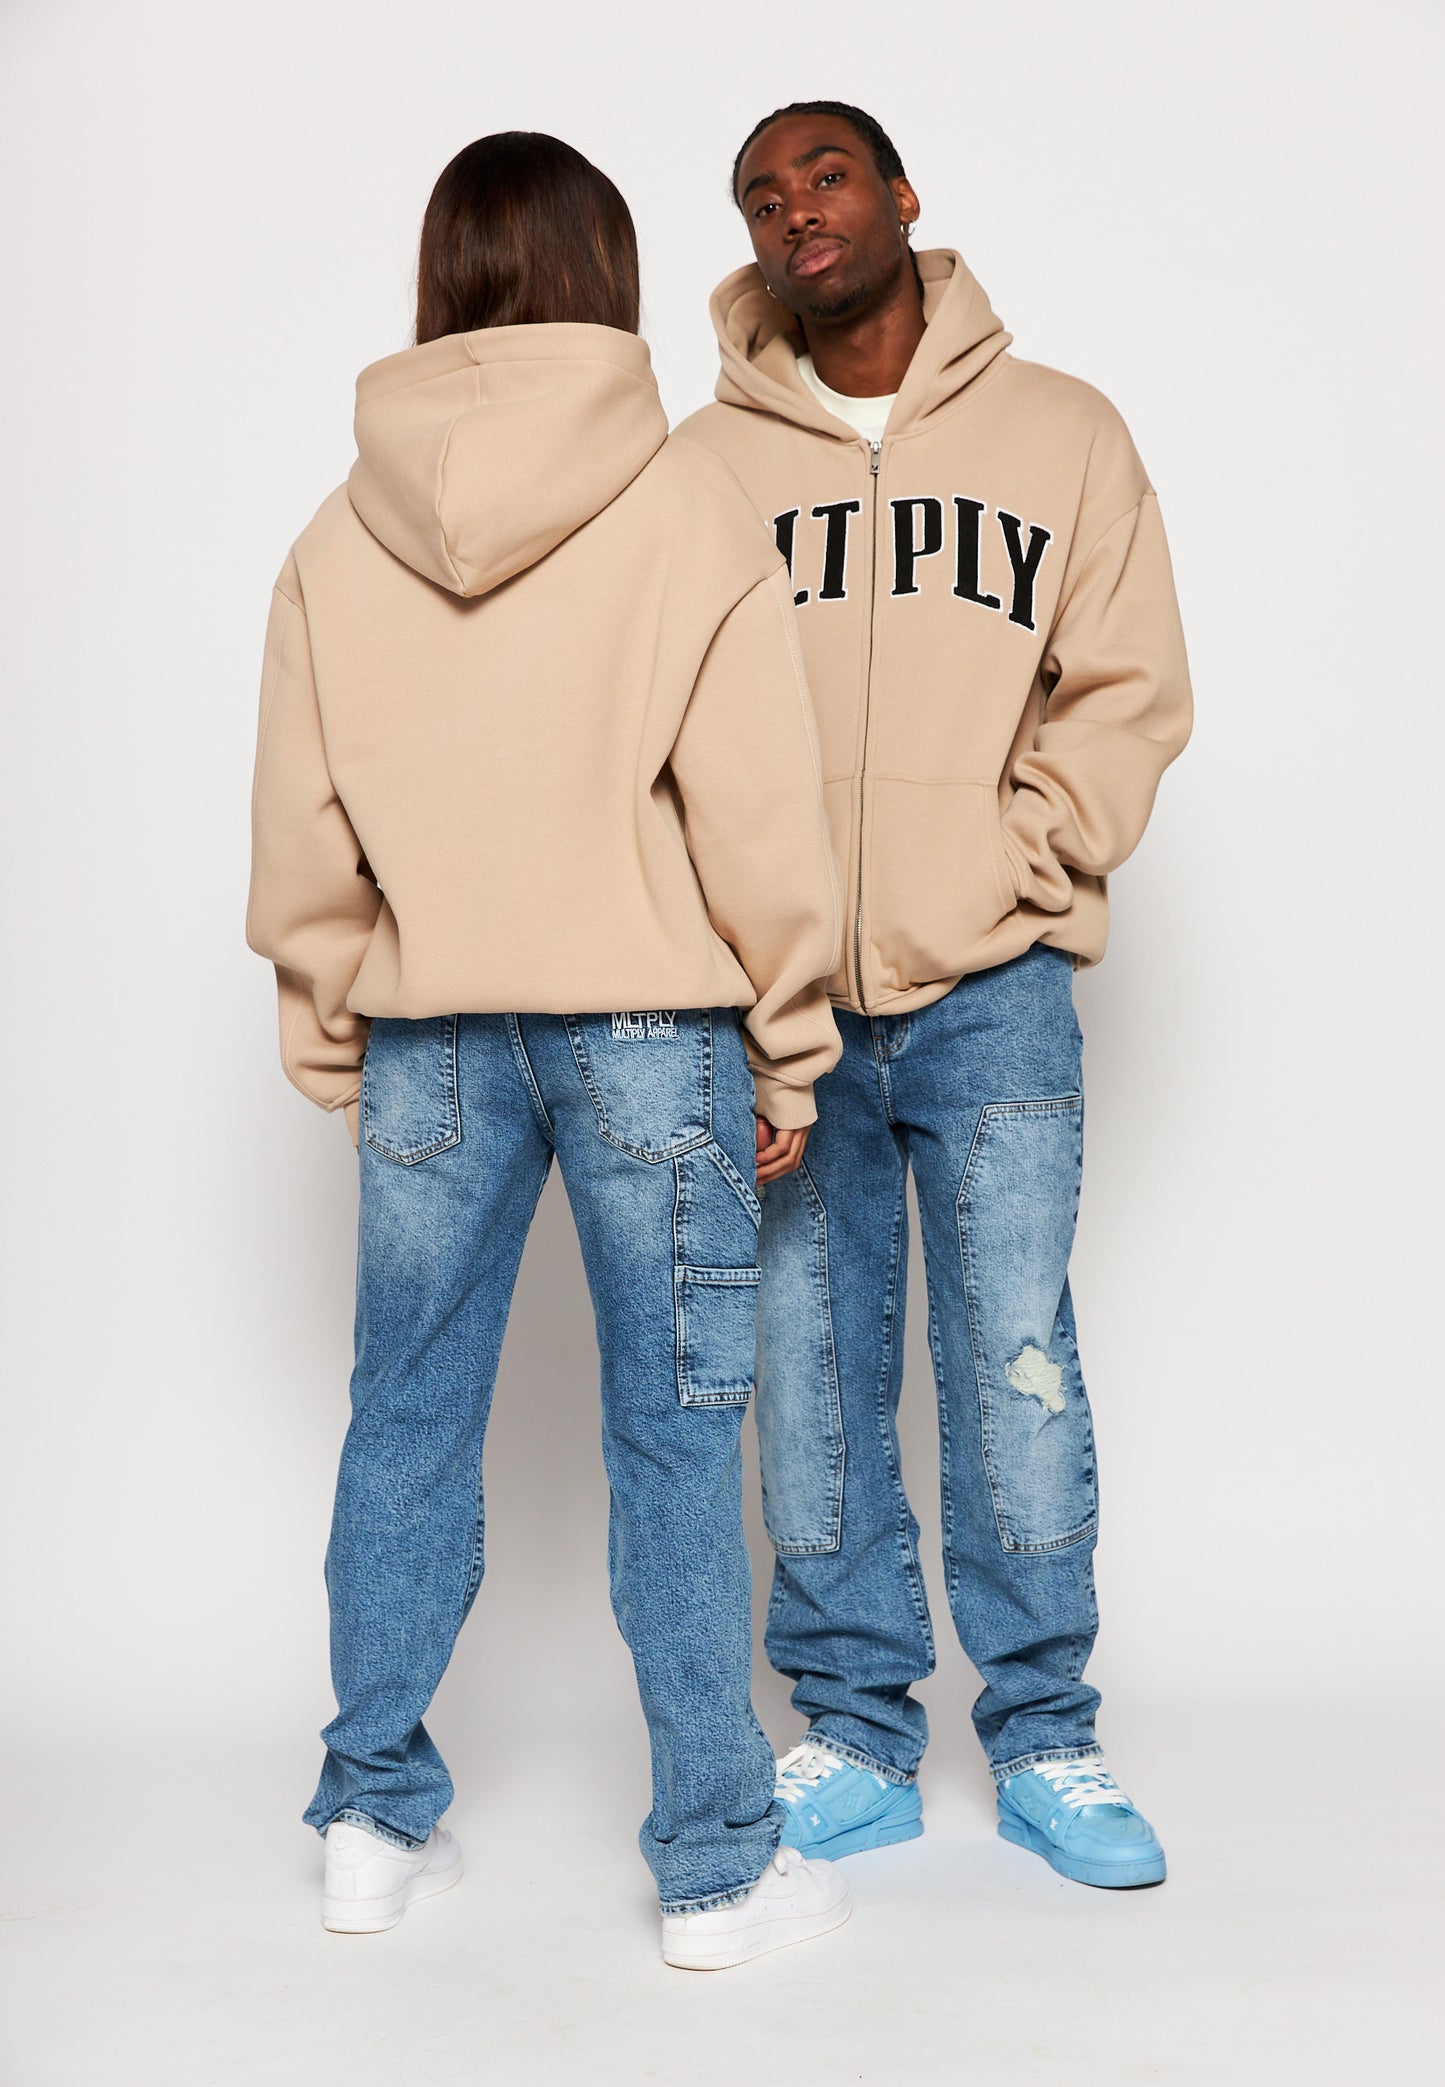 Oversize Zip Hoodie MLTPLY EMBROIDERY Simply Taupe